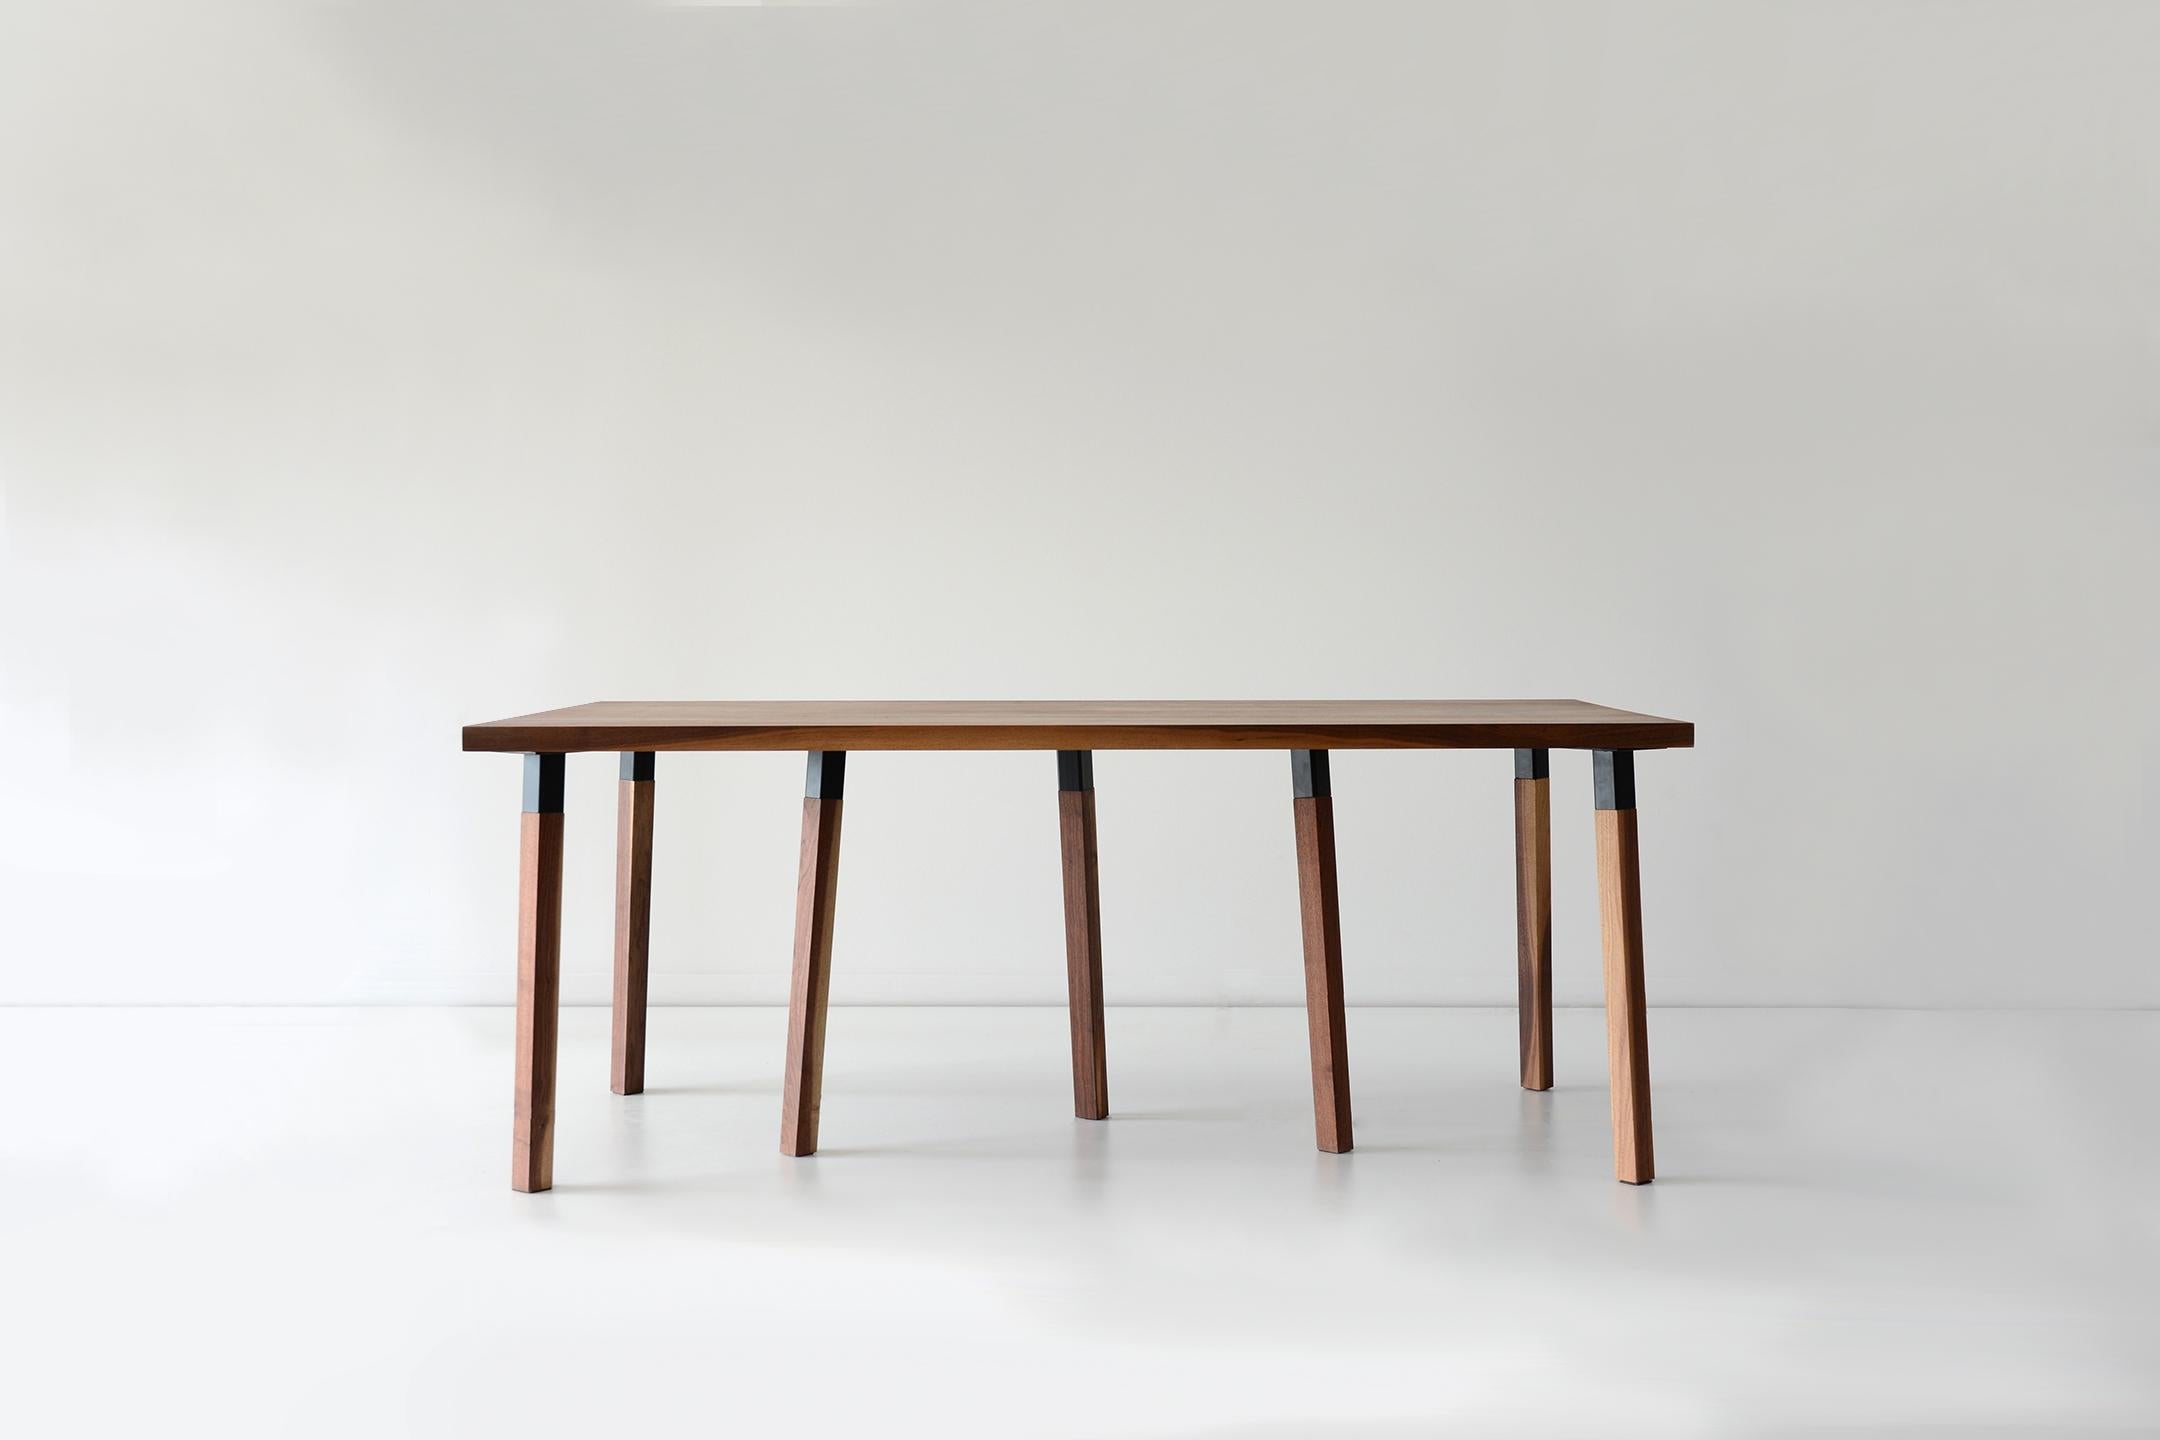 Walnut large pier dining table by Hollis & Morris
Dimensions: 102